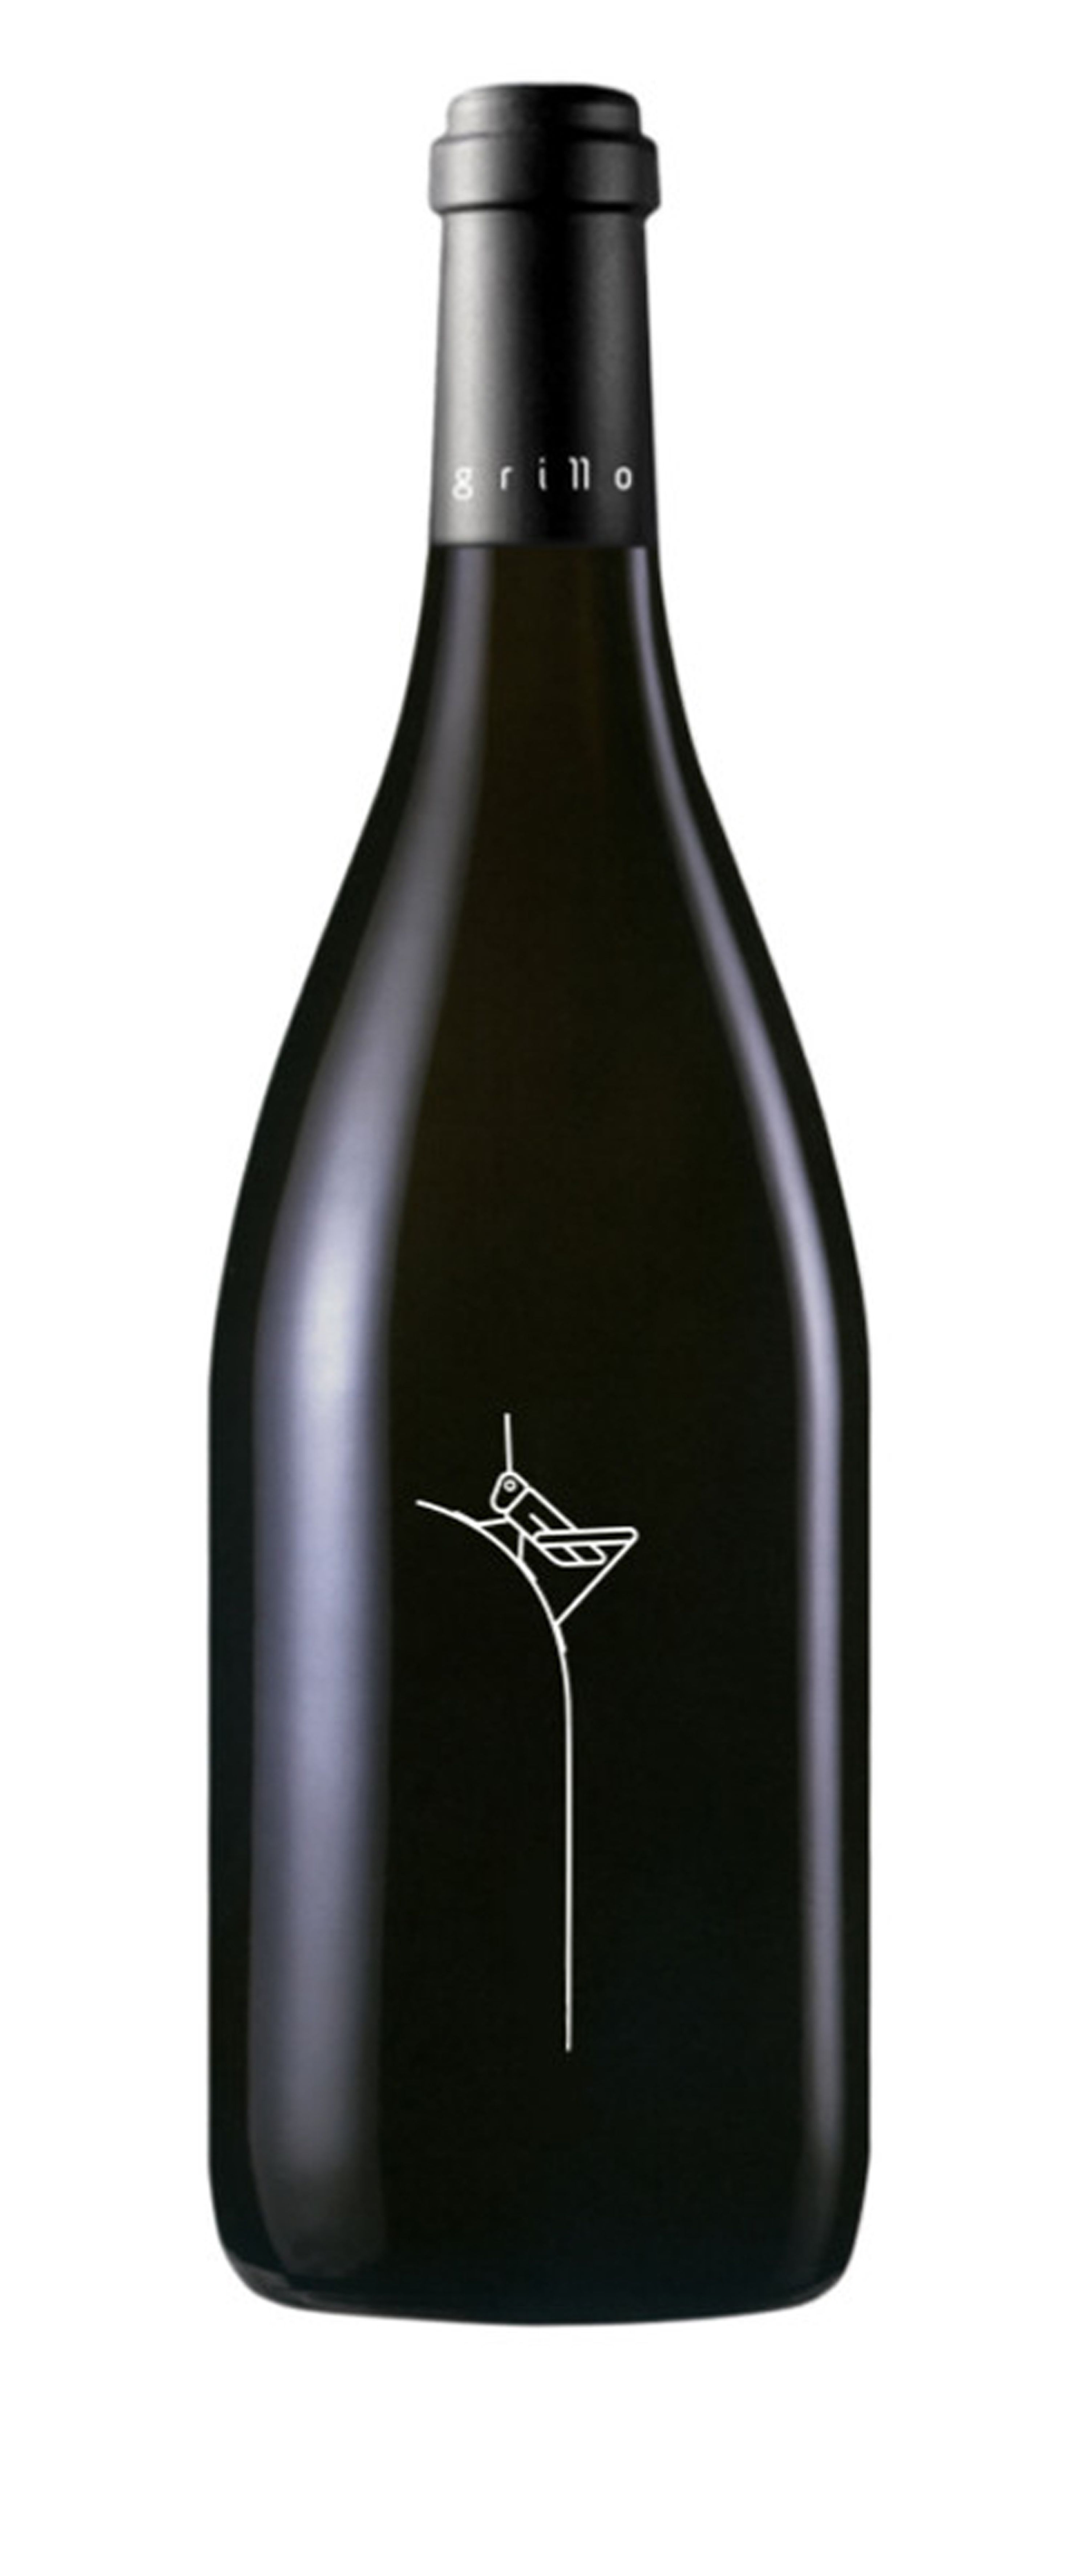 Súper Grillo 2009, from Bodega El Grillo y la Luna, picks up the only grand gold medal for a Somontano D.O. wine at the Concours Mondial de Bruselles